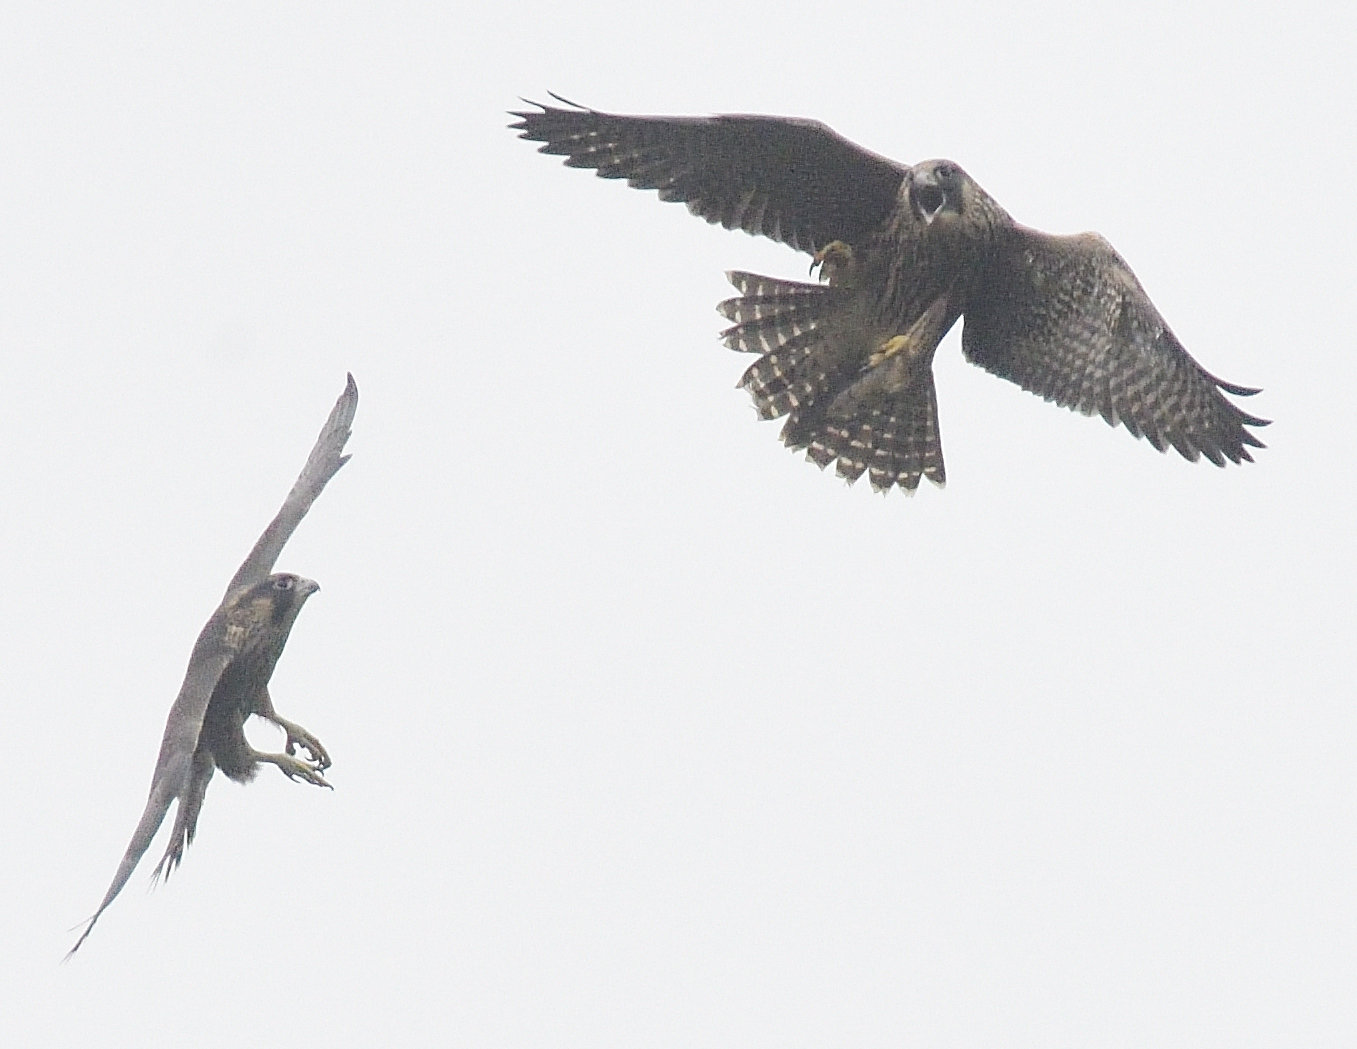 These are two young doing mock battle in the sky with each other. They do no harm during these talon displays, and they develop valuable flying skills that will help them in the future. Young peregrines have vertical stripes on the chest and have more of a brown shade in their plumage compared to the adult’s gray plumage.